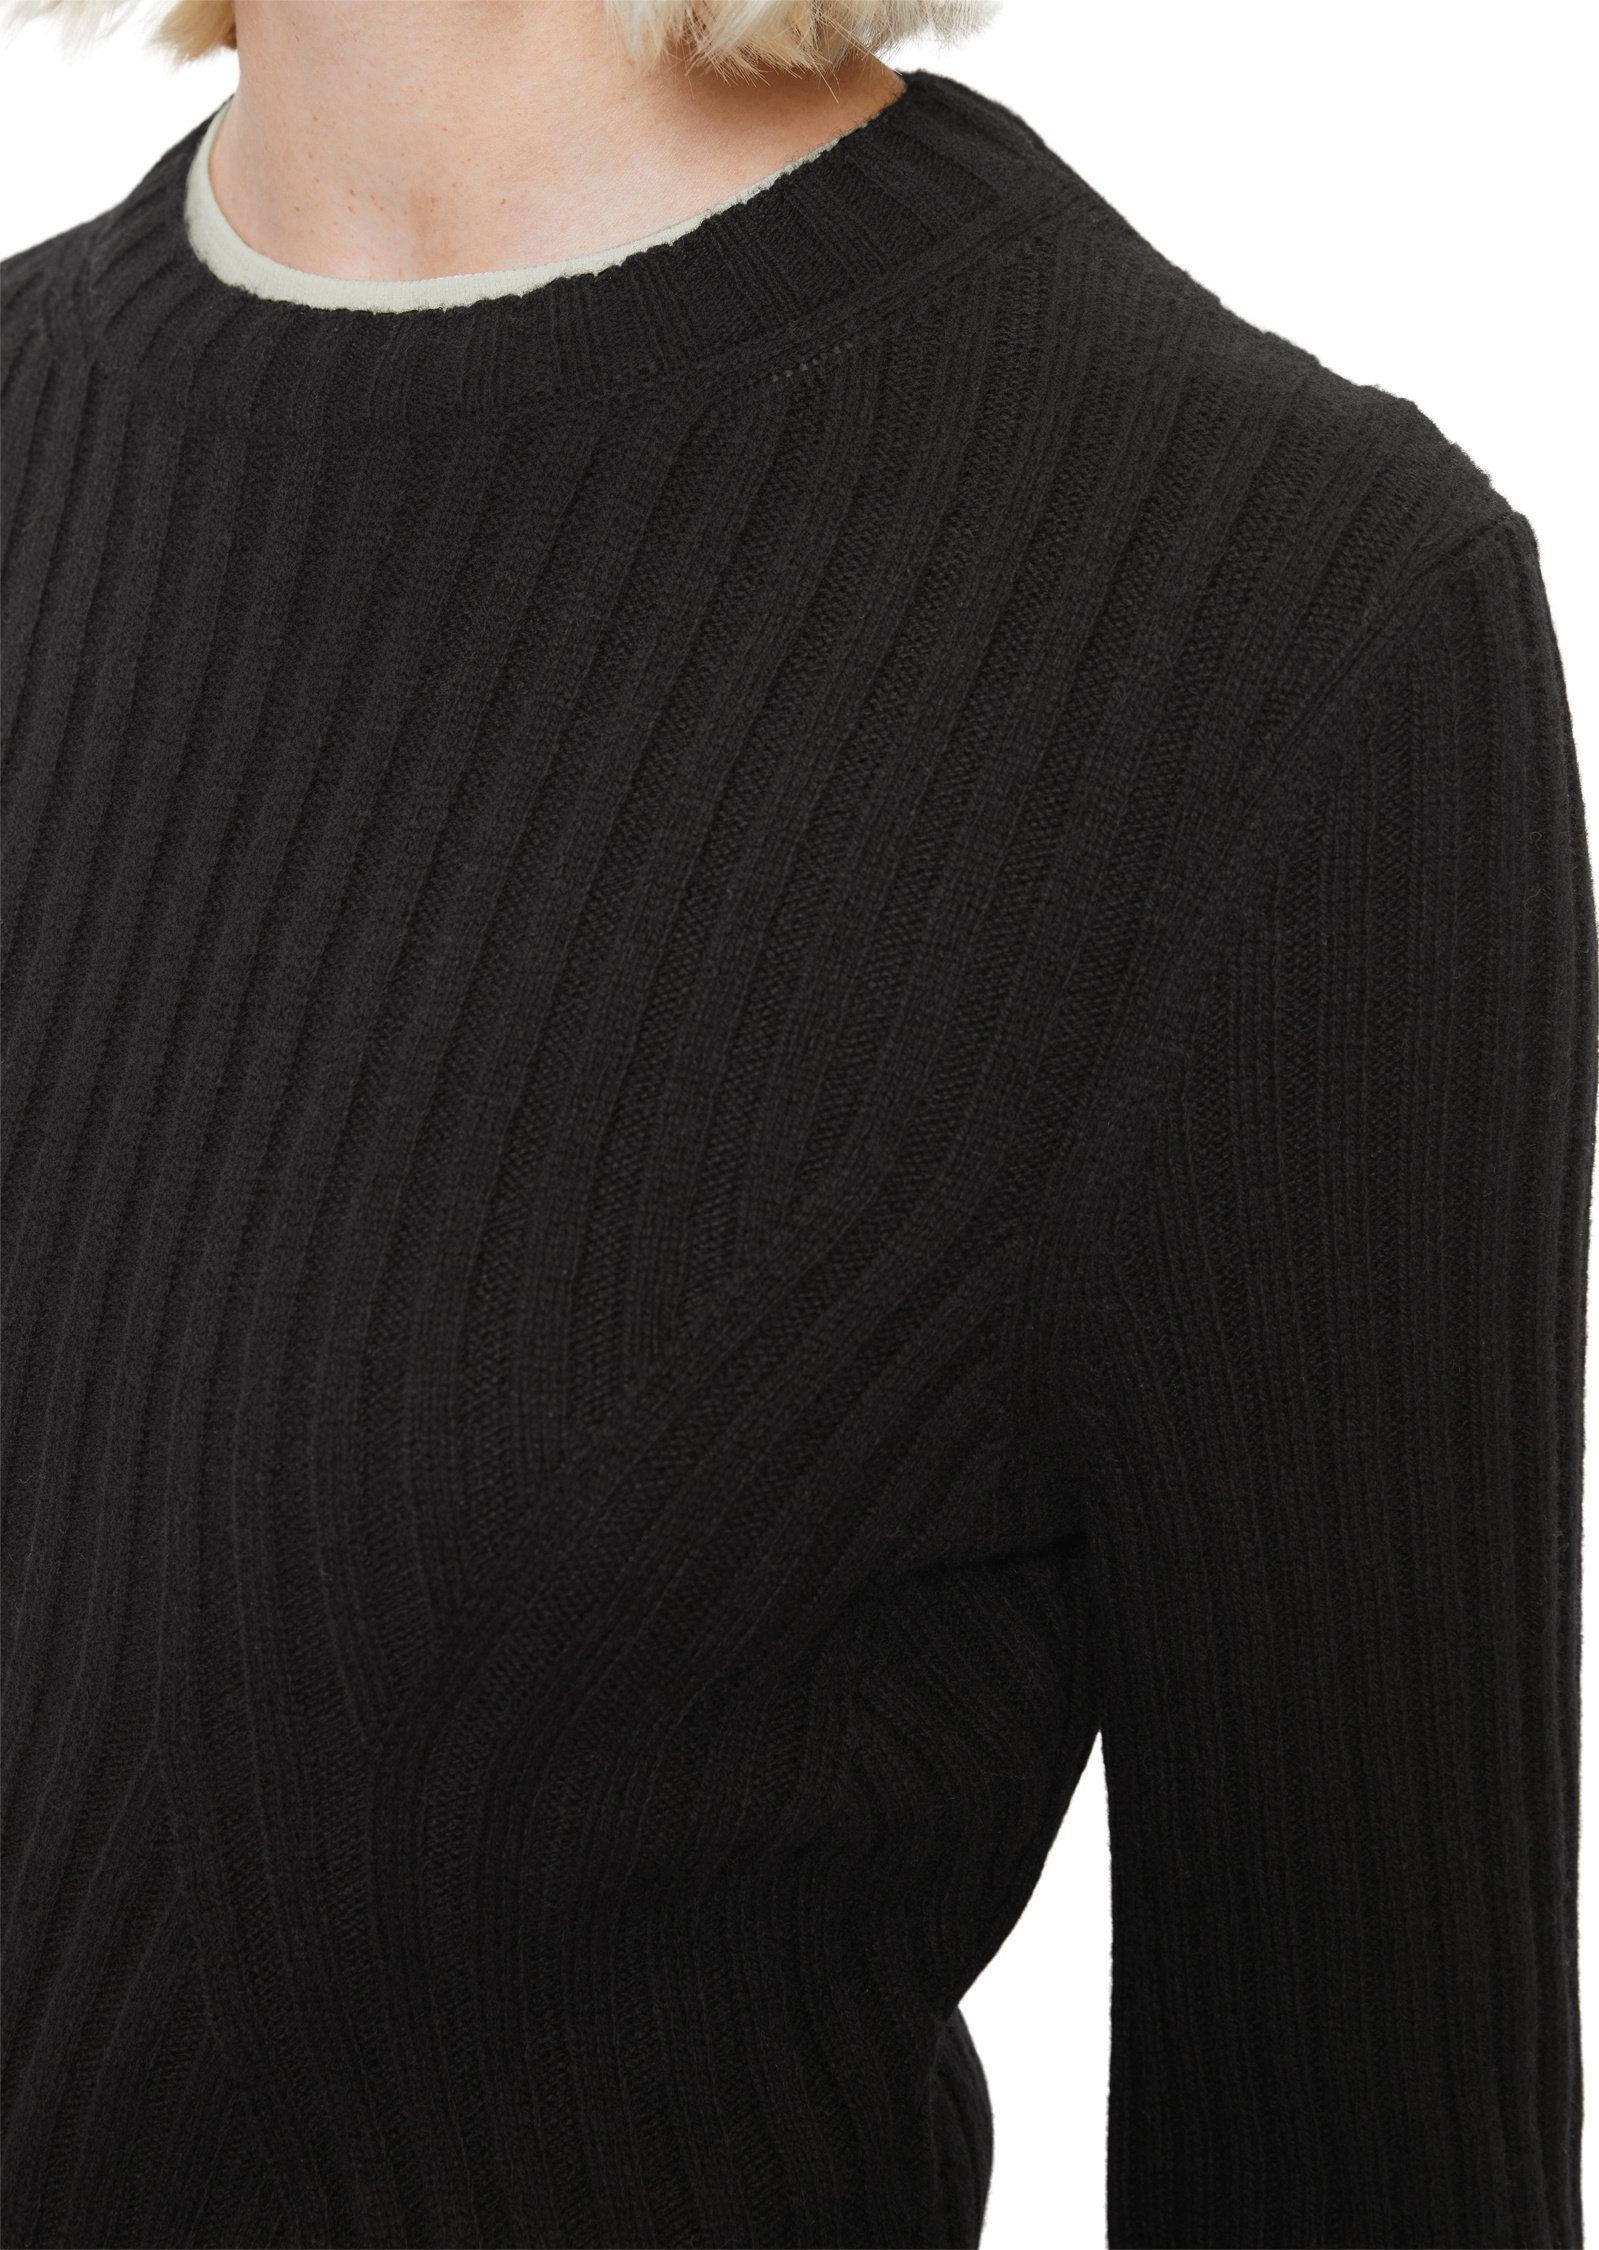 O'Polo Fully Marc Strickpullover schwarz mit Details fashioned